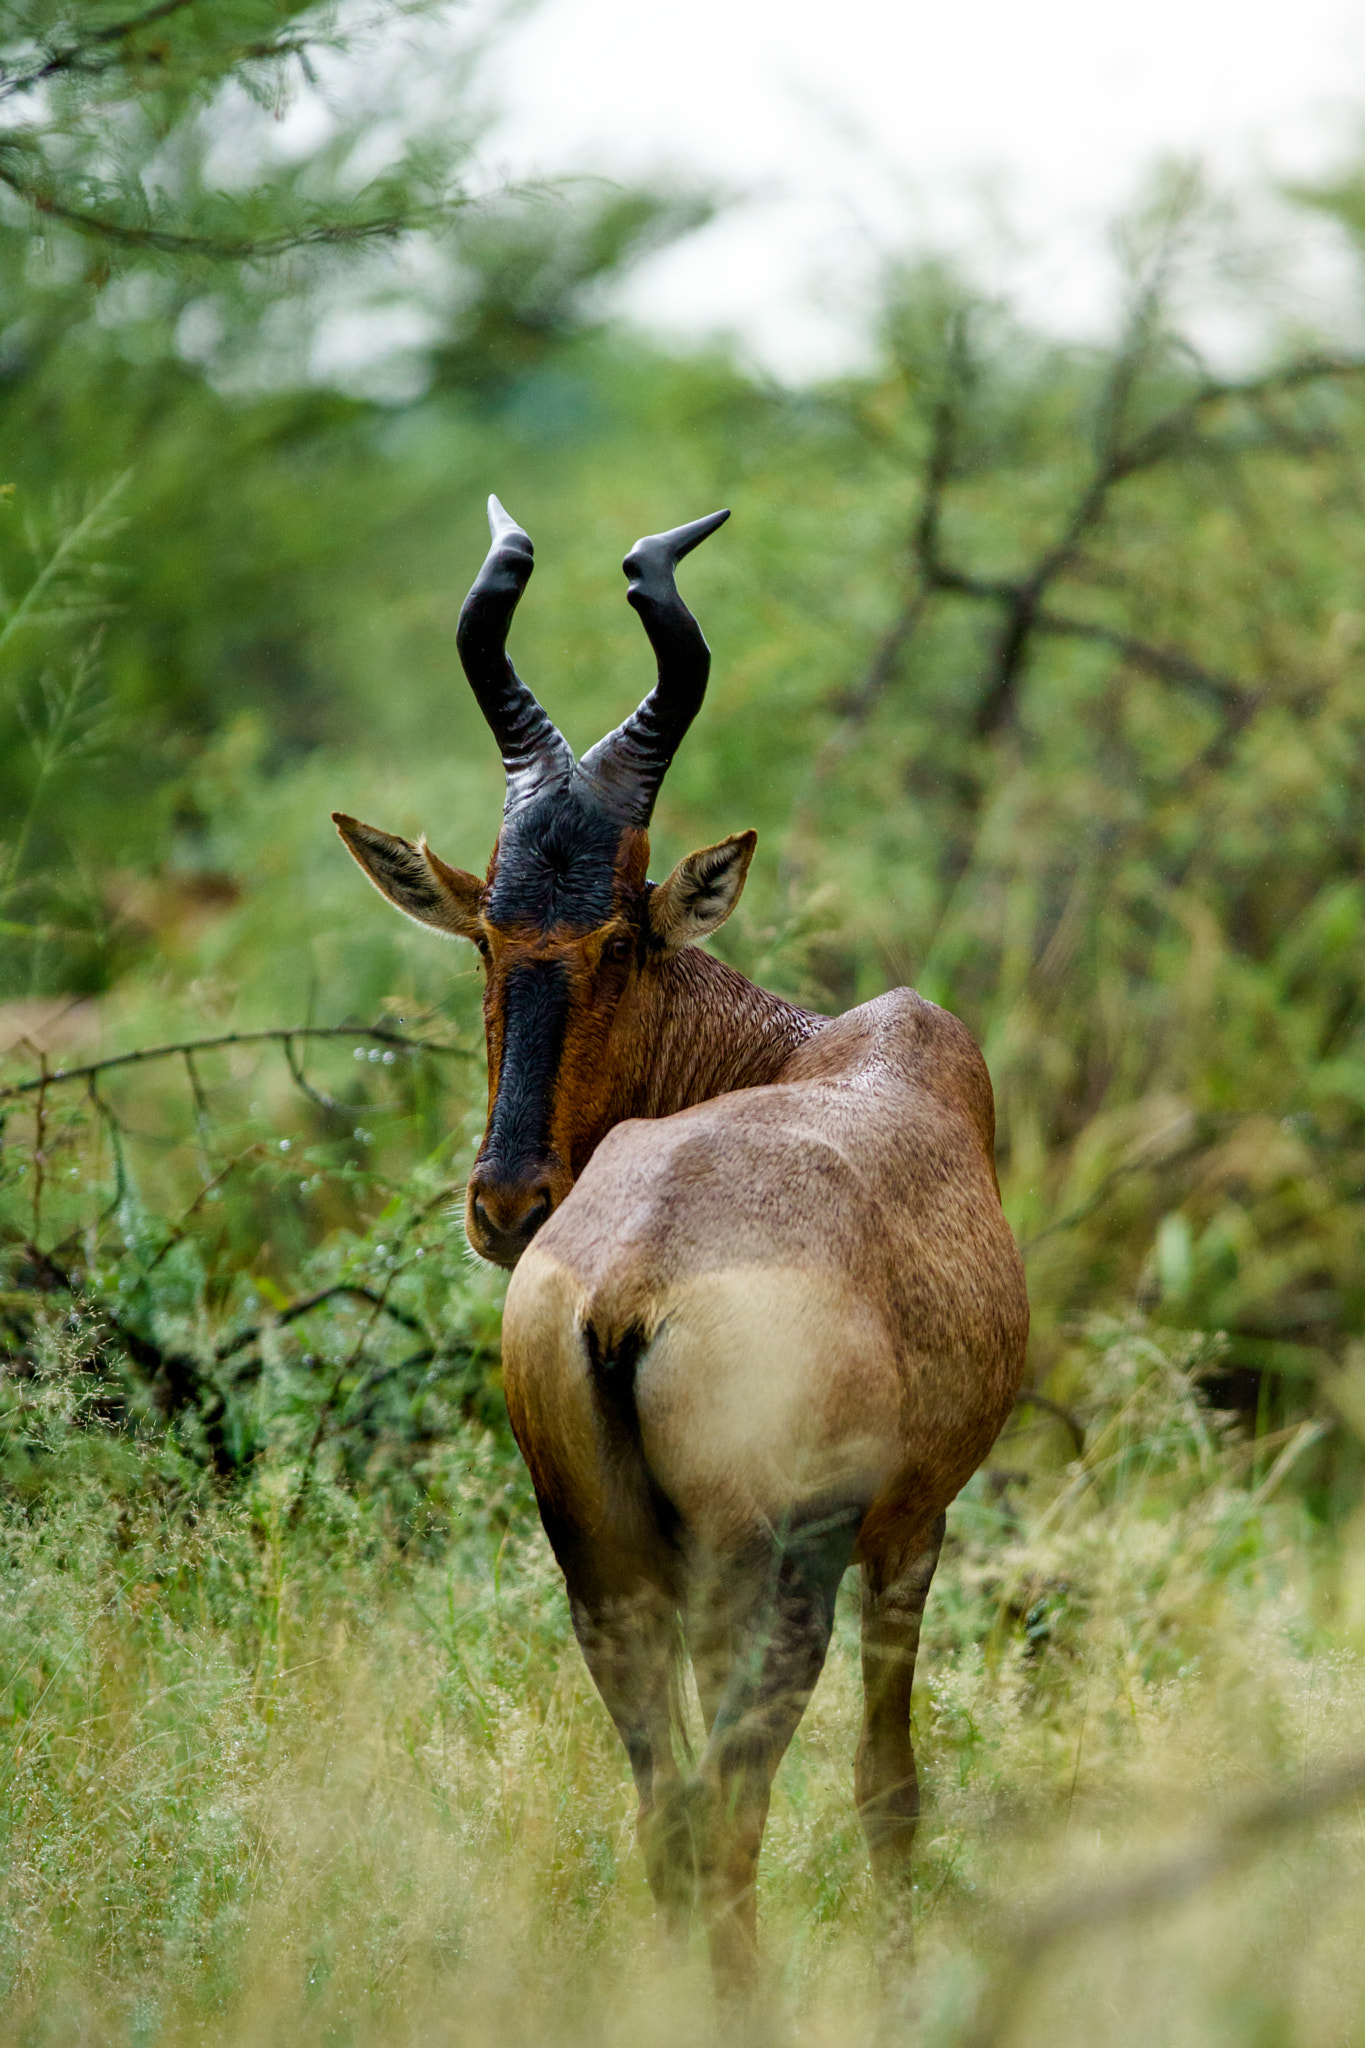 300mm F2.8 G sample photo. Red hartebeest photography